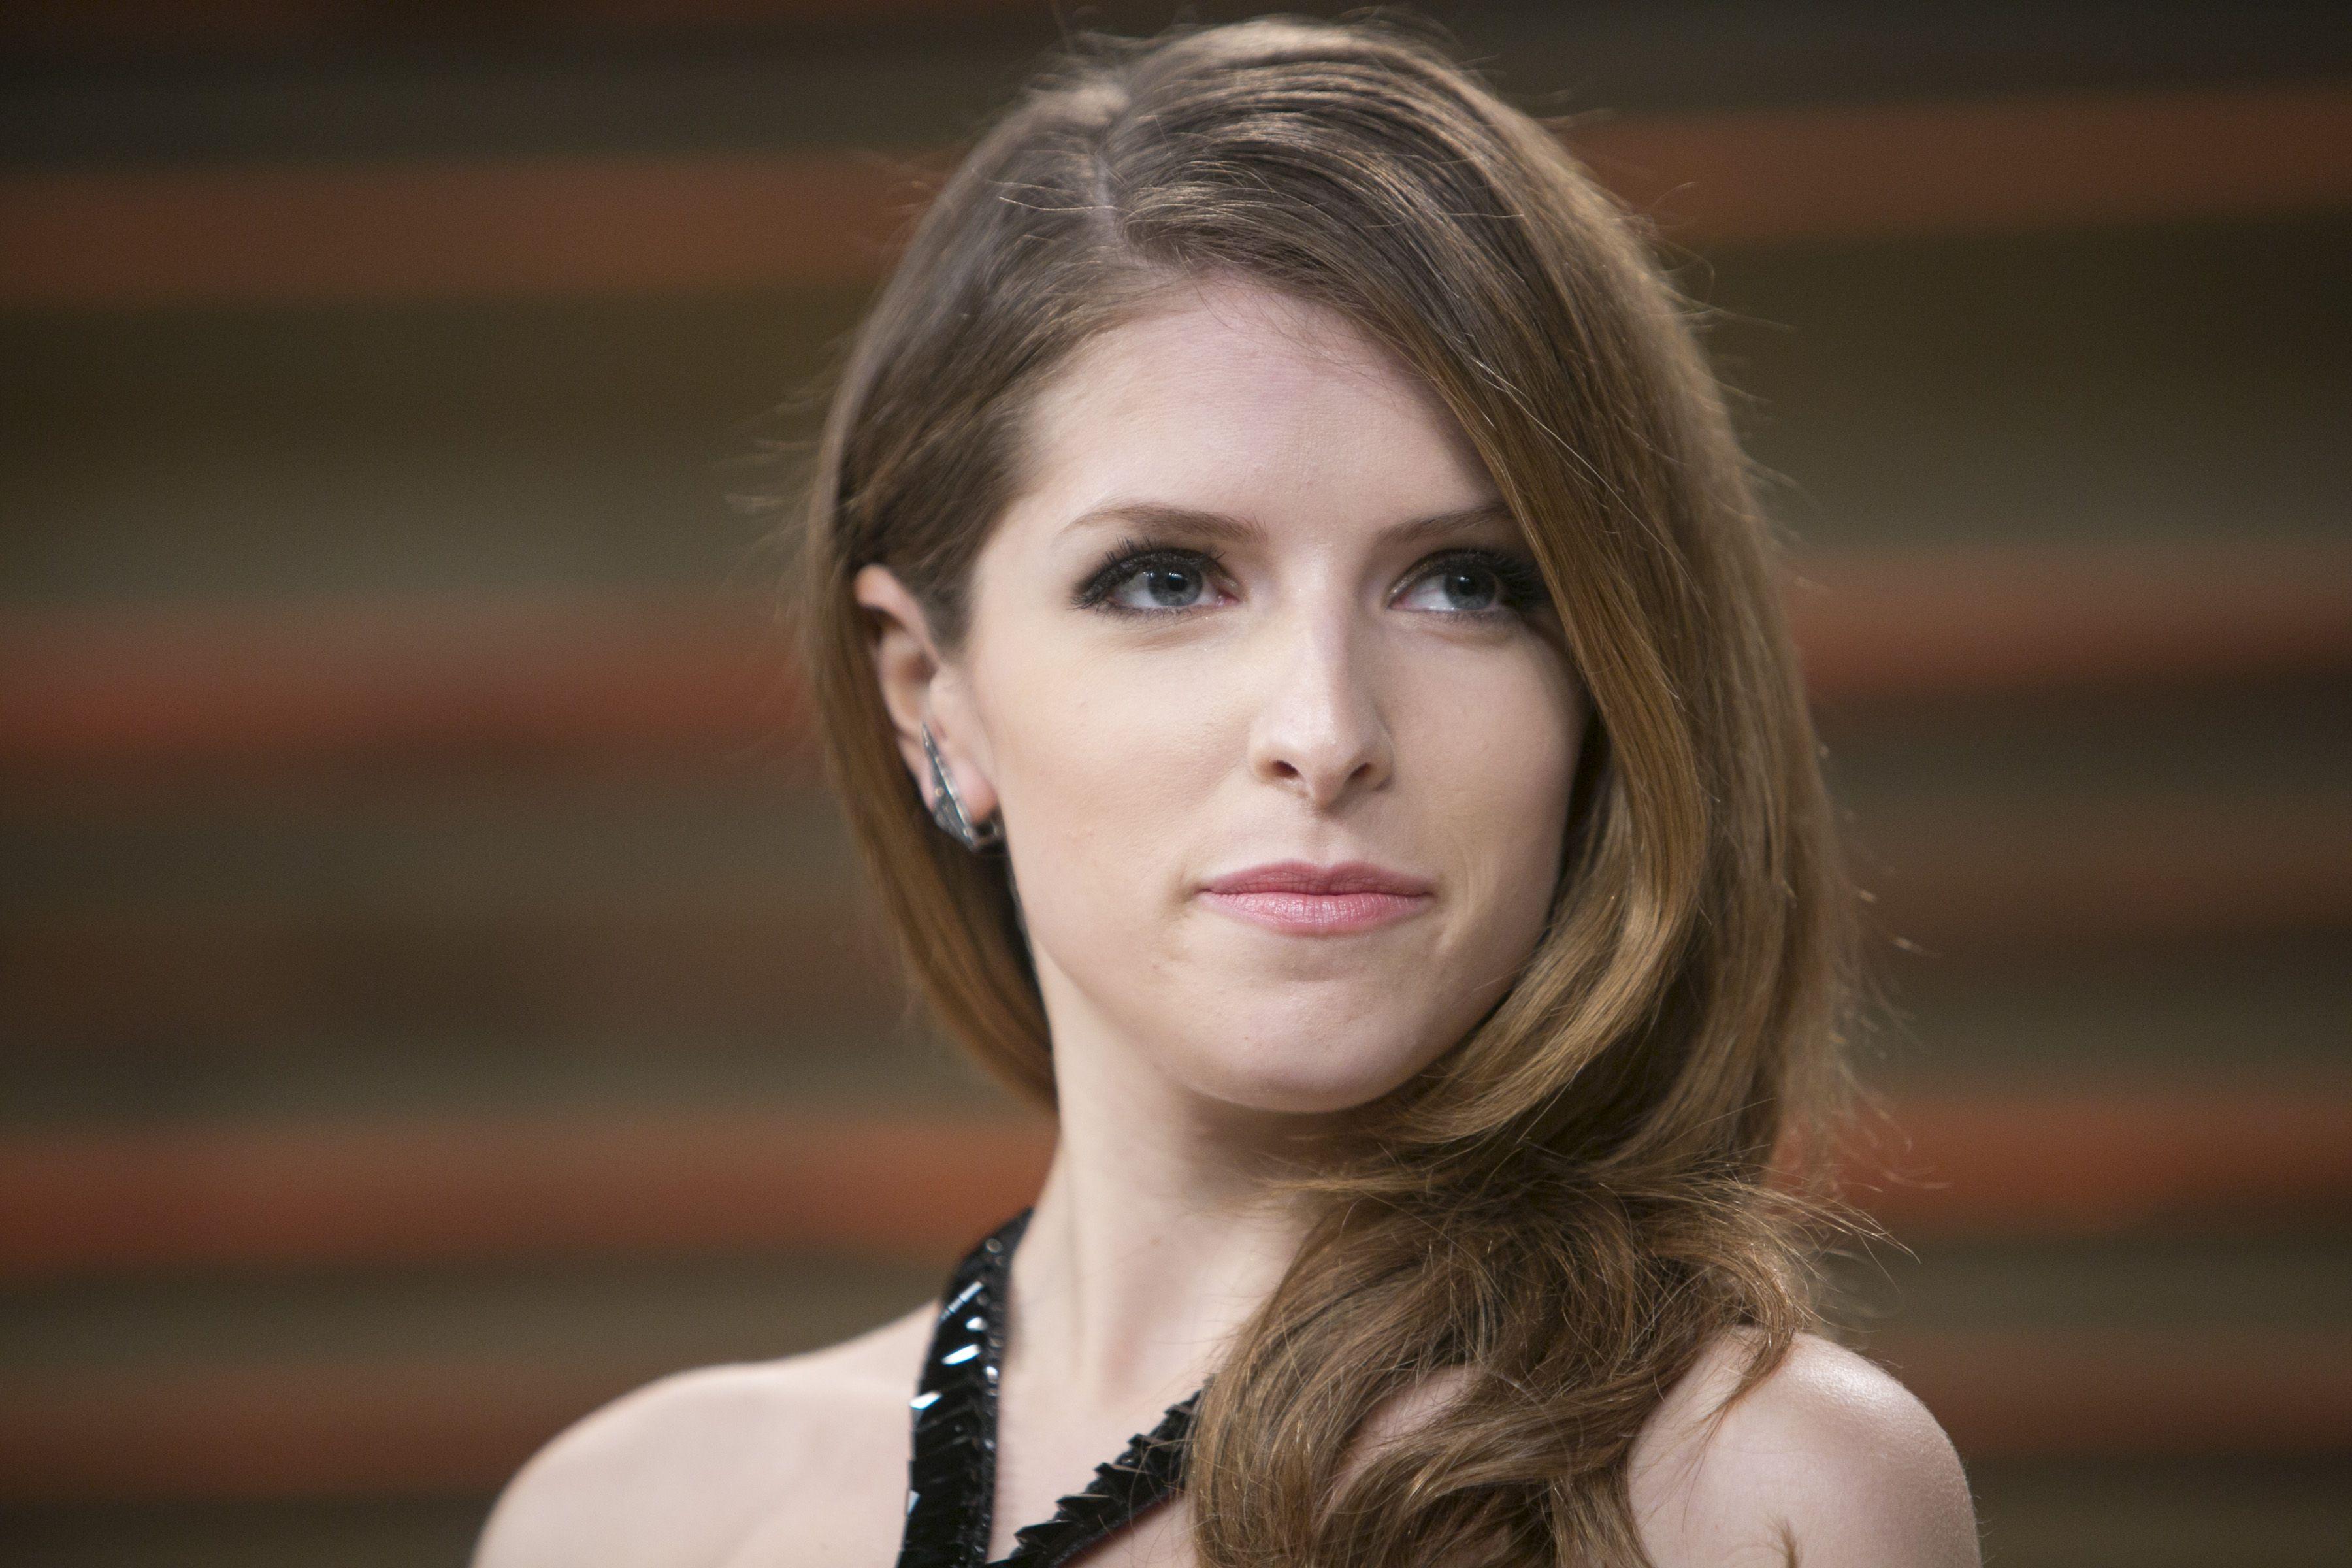 11 Wisdoms From Anna Kendrick That Prove Her Book Of Essays Is